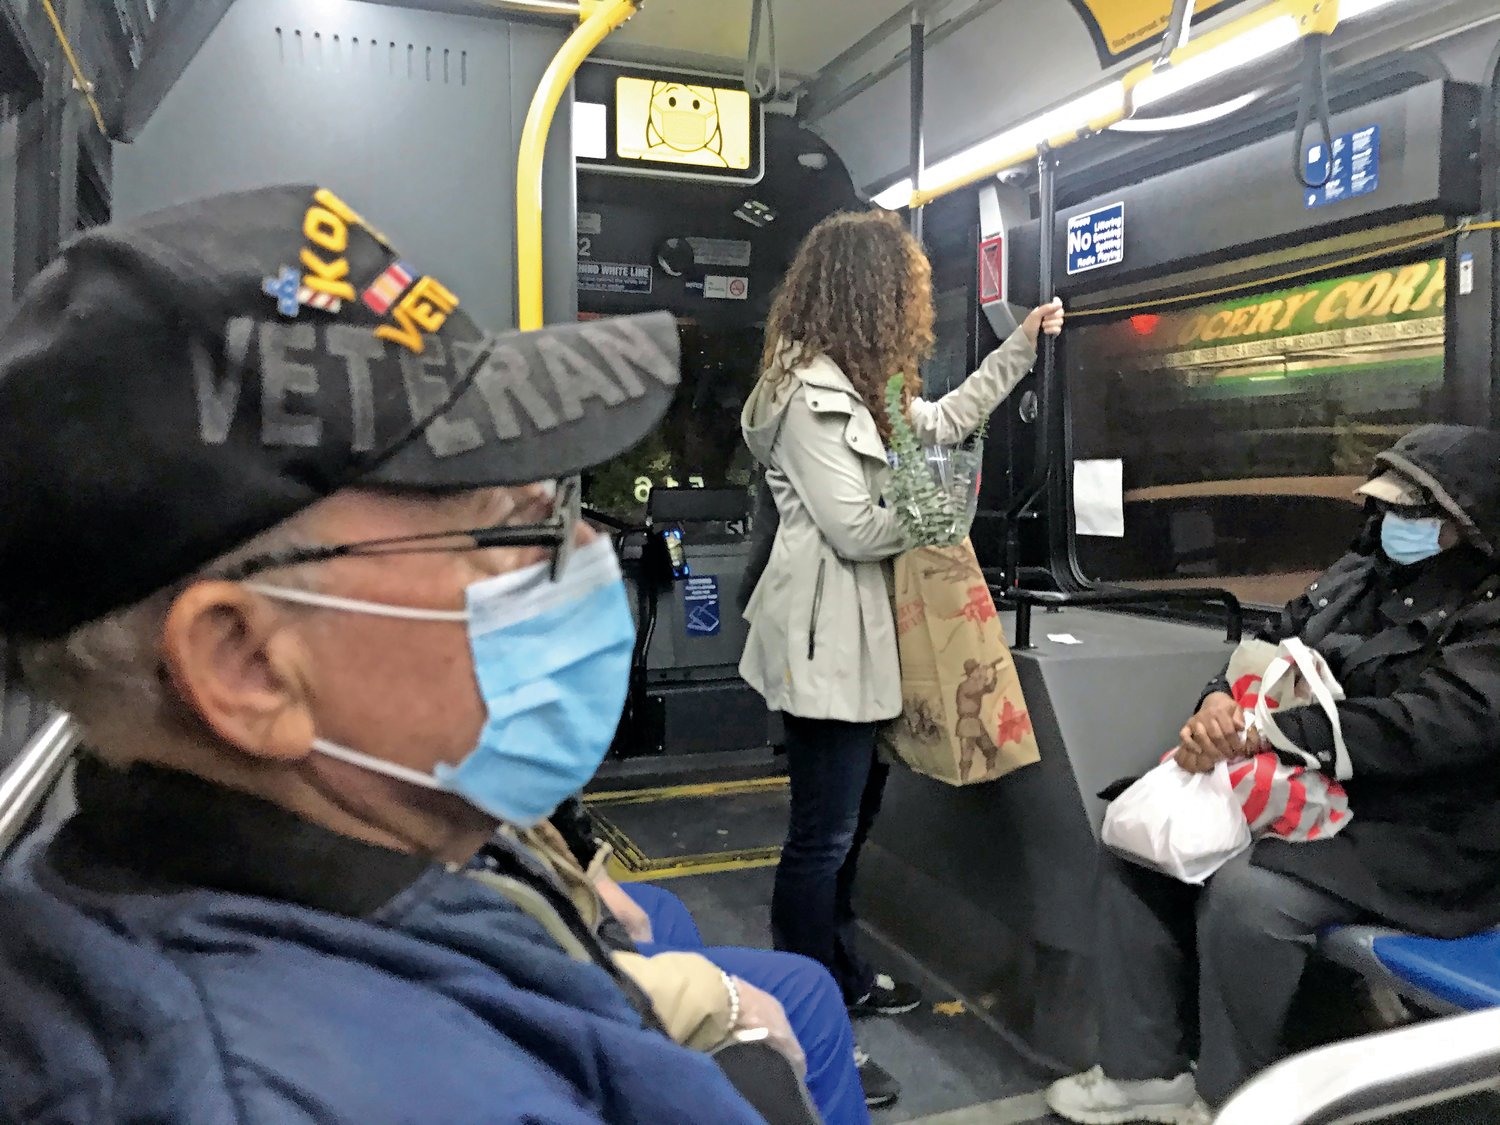 Gov. Kathy Hochul announced last week the end of the mask mandate on public transportation — including busses and subways in New York City, as well as the Long Island Rail Road — shedding a requirement first instituted at the height of the coronavirus pandemic more than two years ago, which has been largely ignored over the last several months anyway.